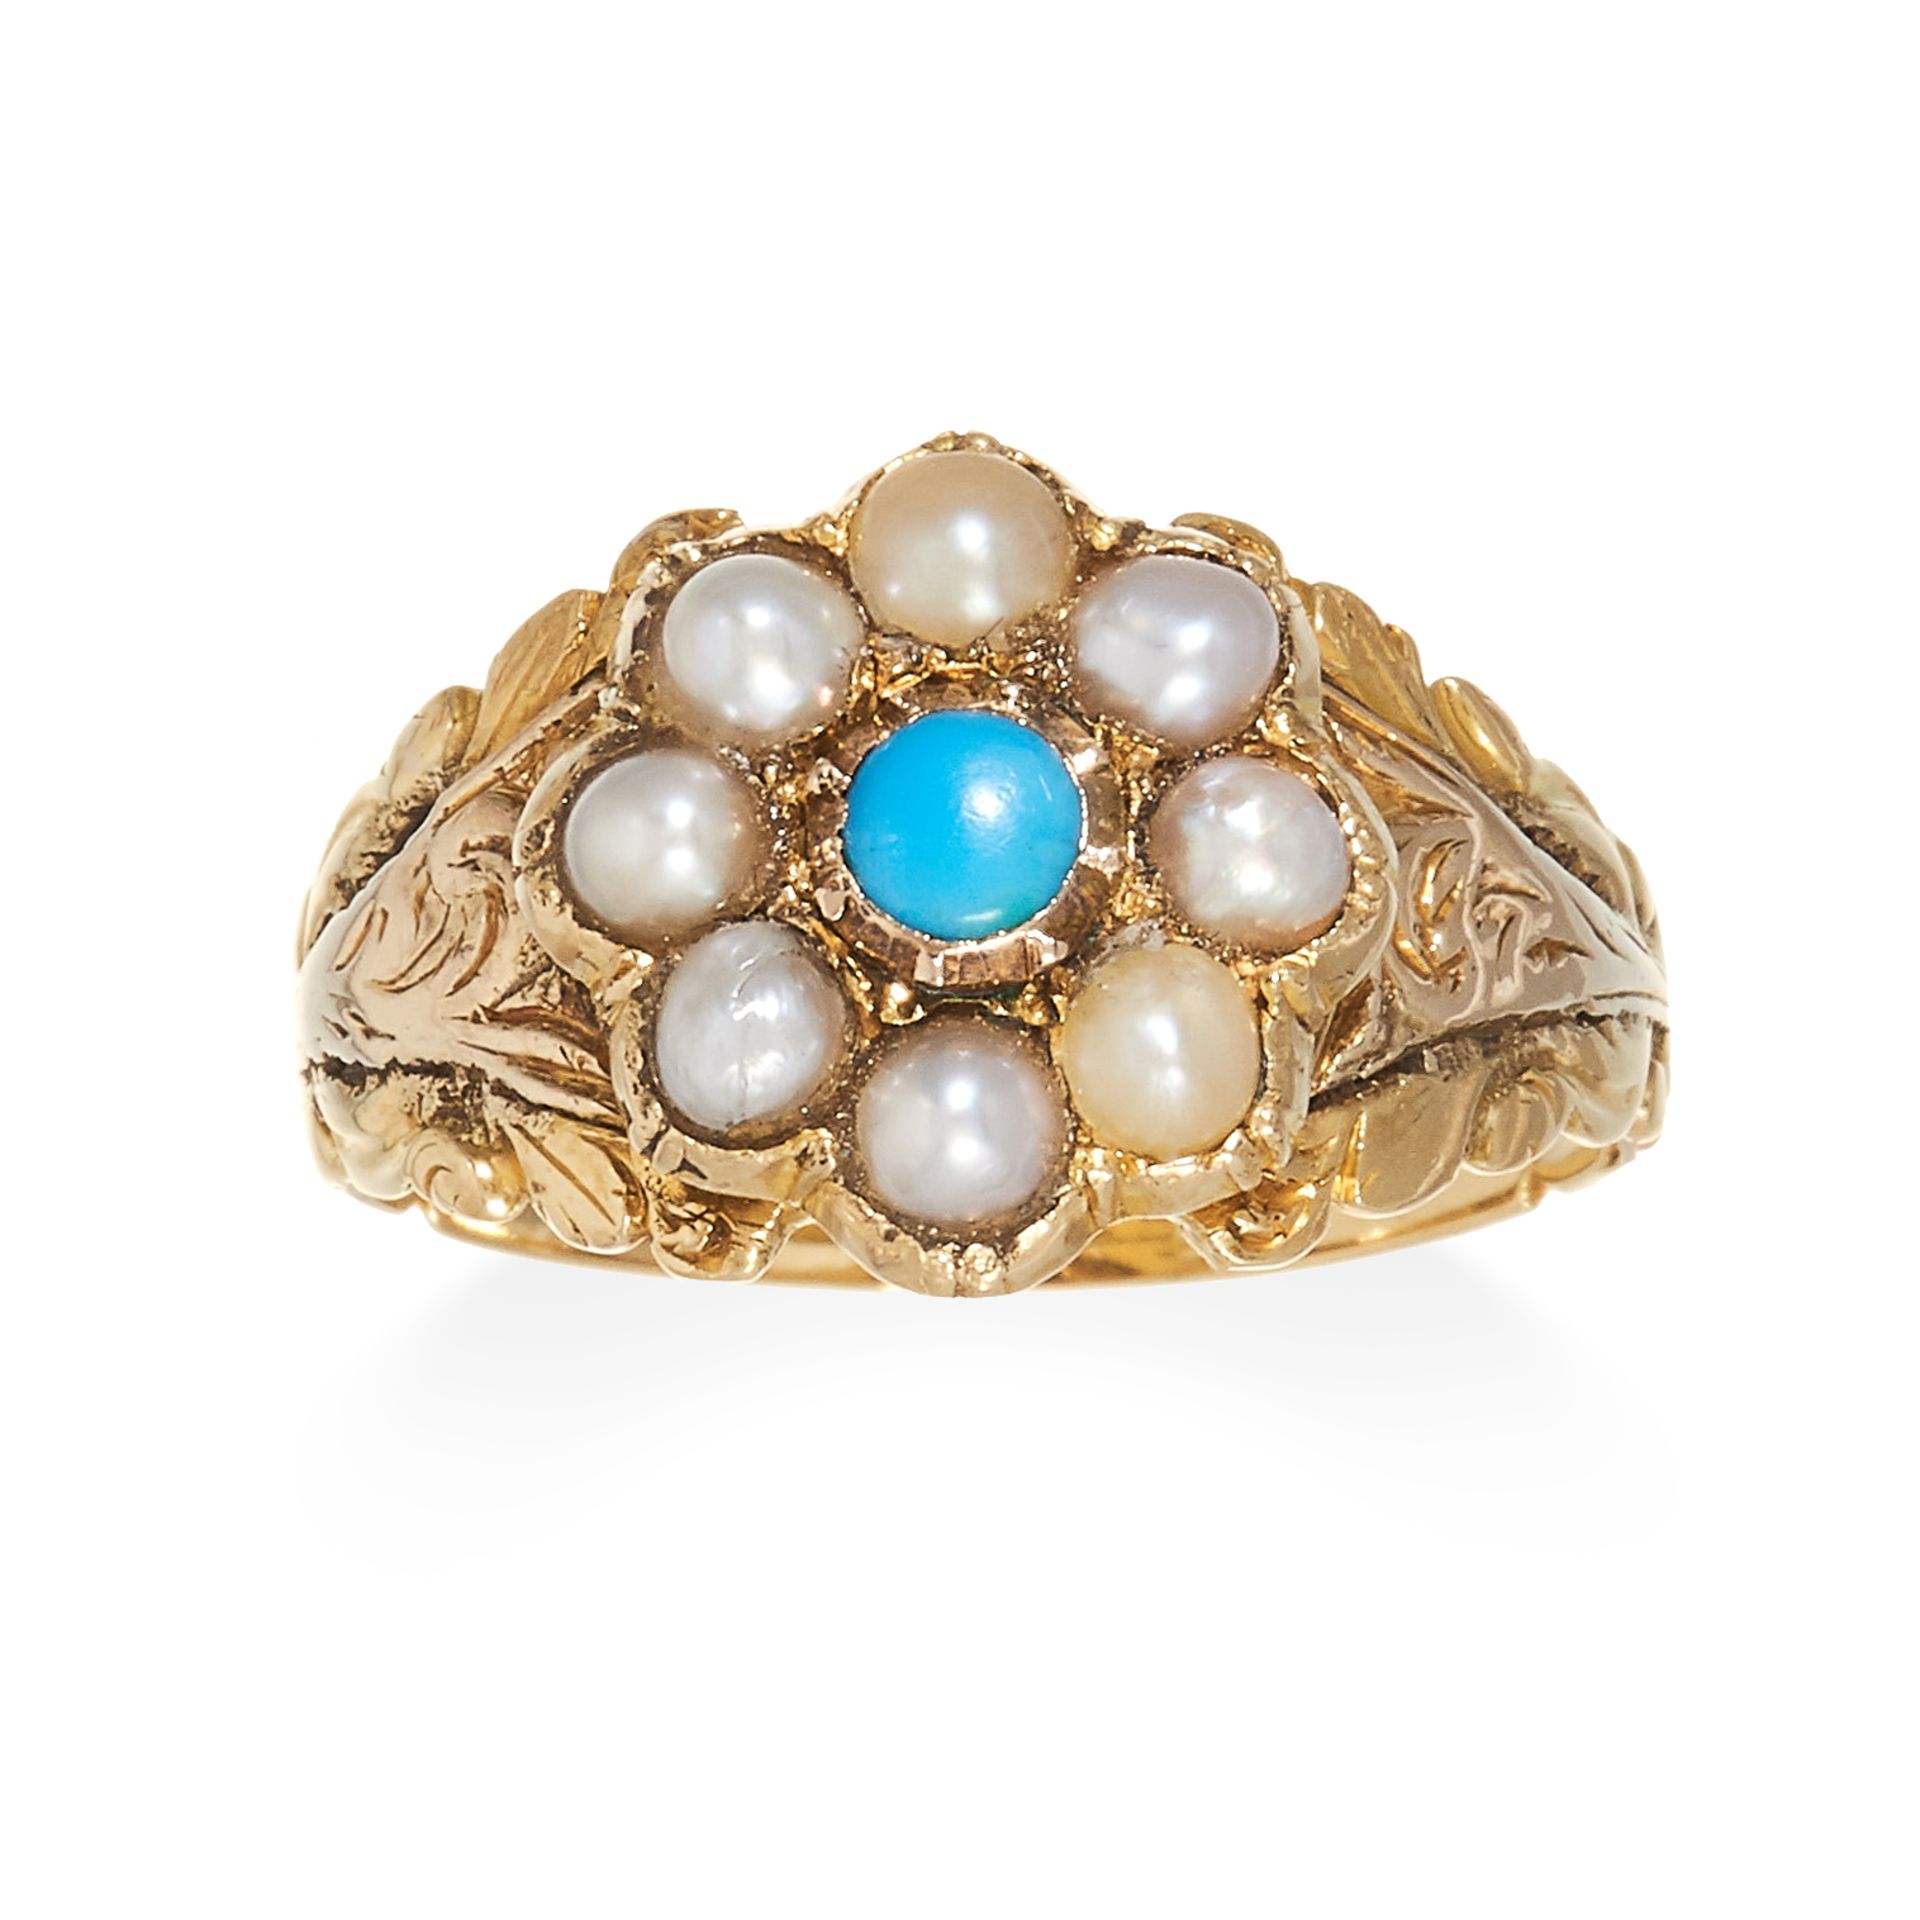 A TURQUOISE AND PEARL MOURNING RING, 19TH CENTURY in high carat yellow gold, set with a turquoise